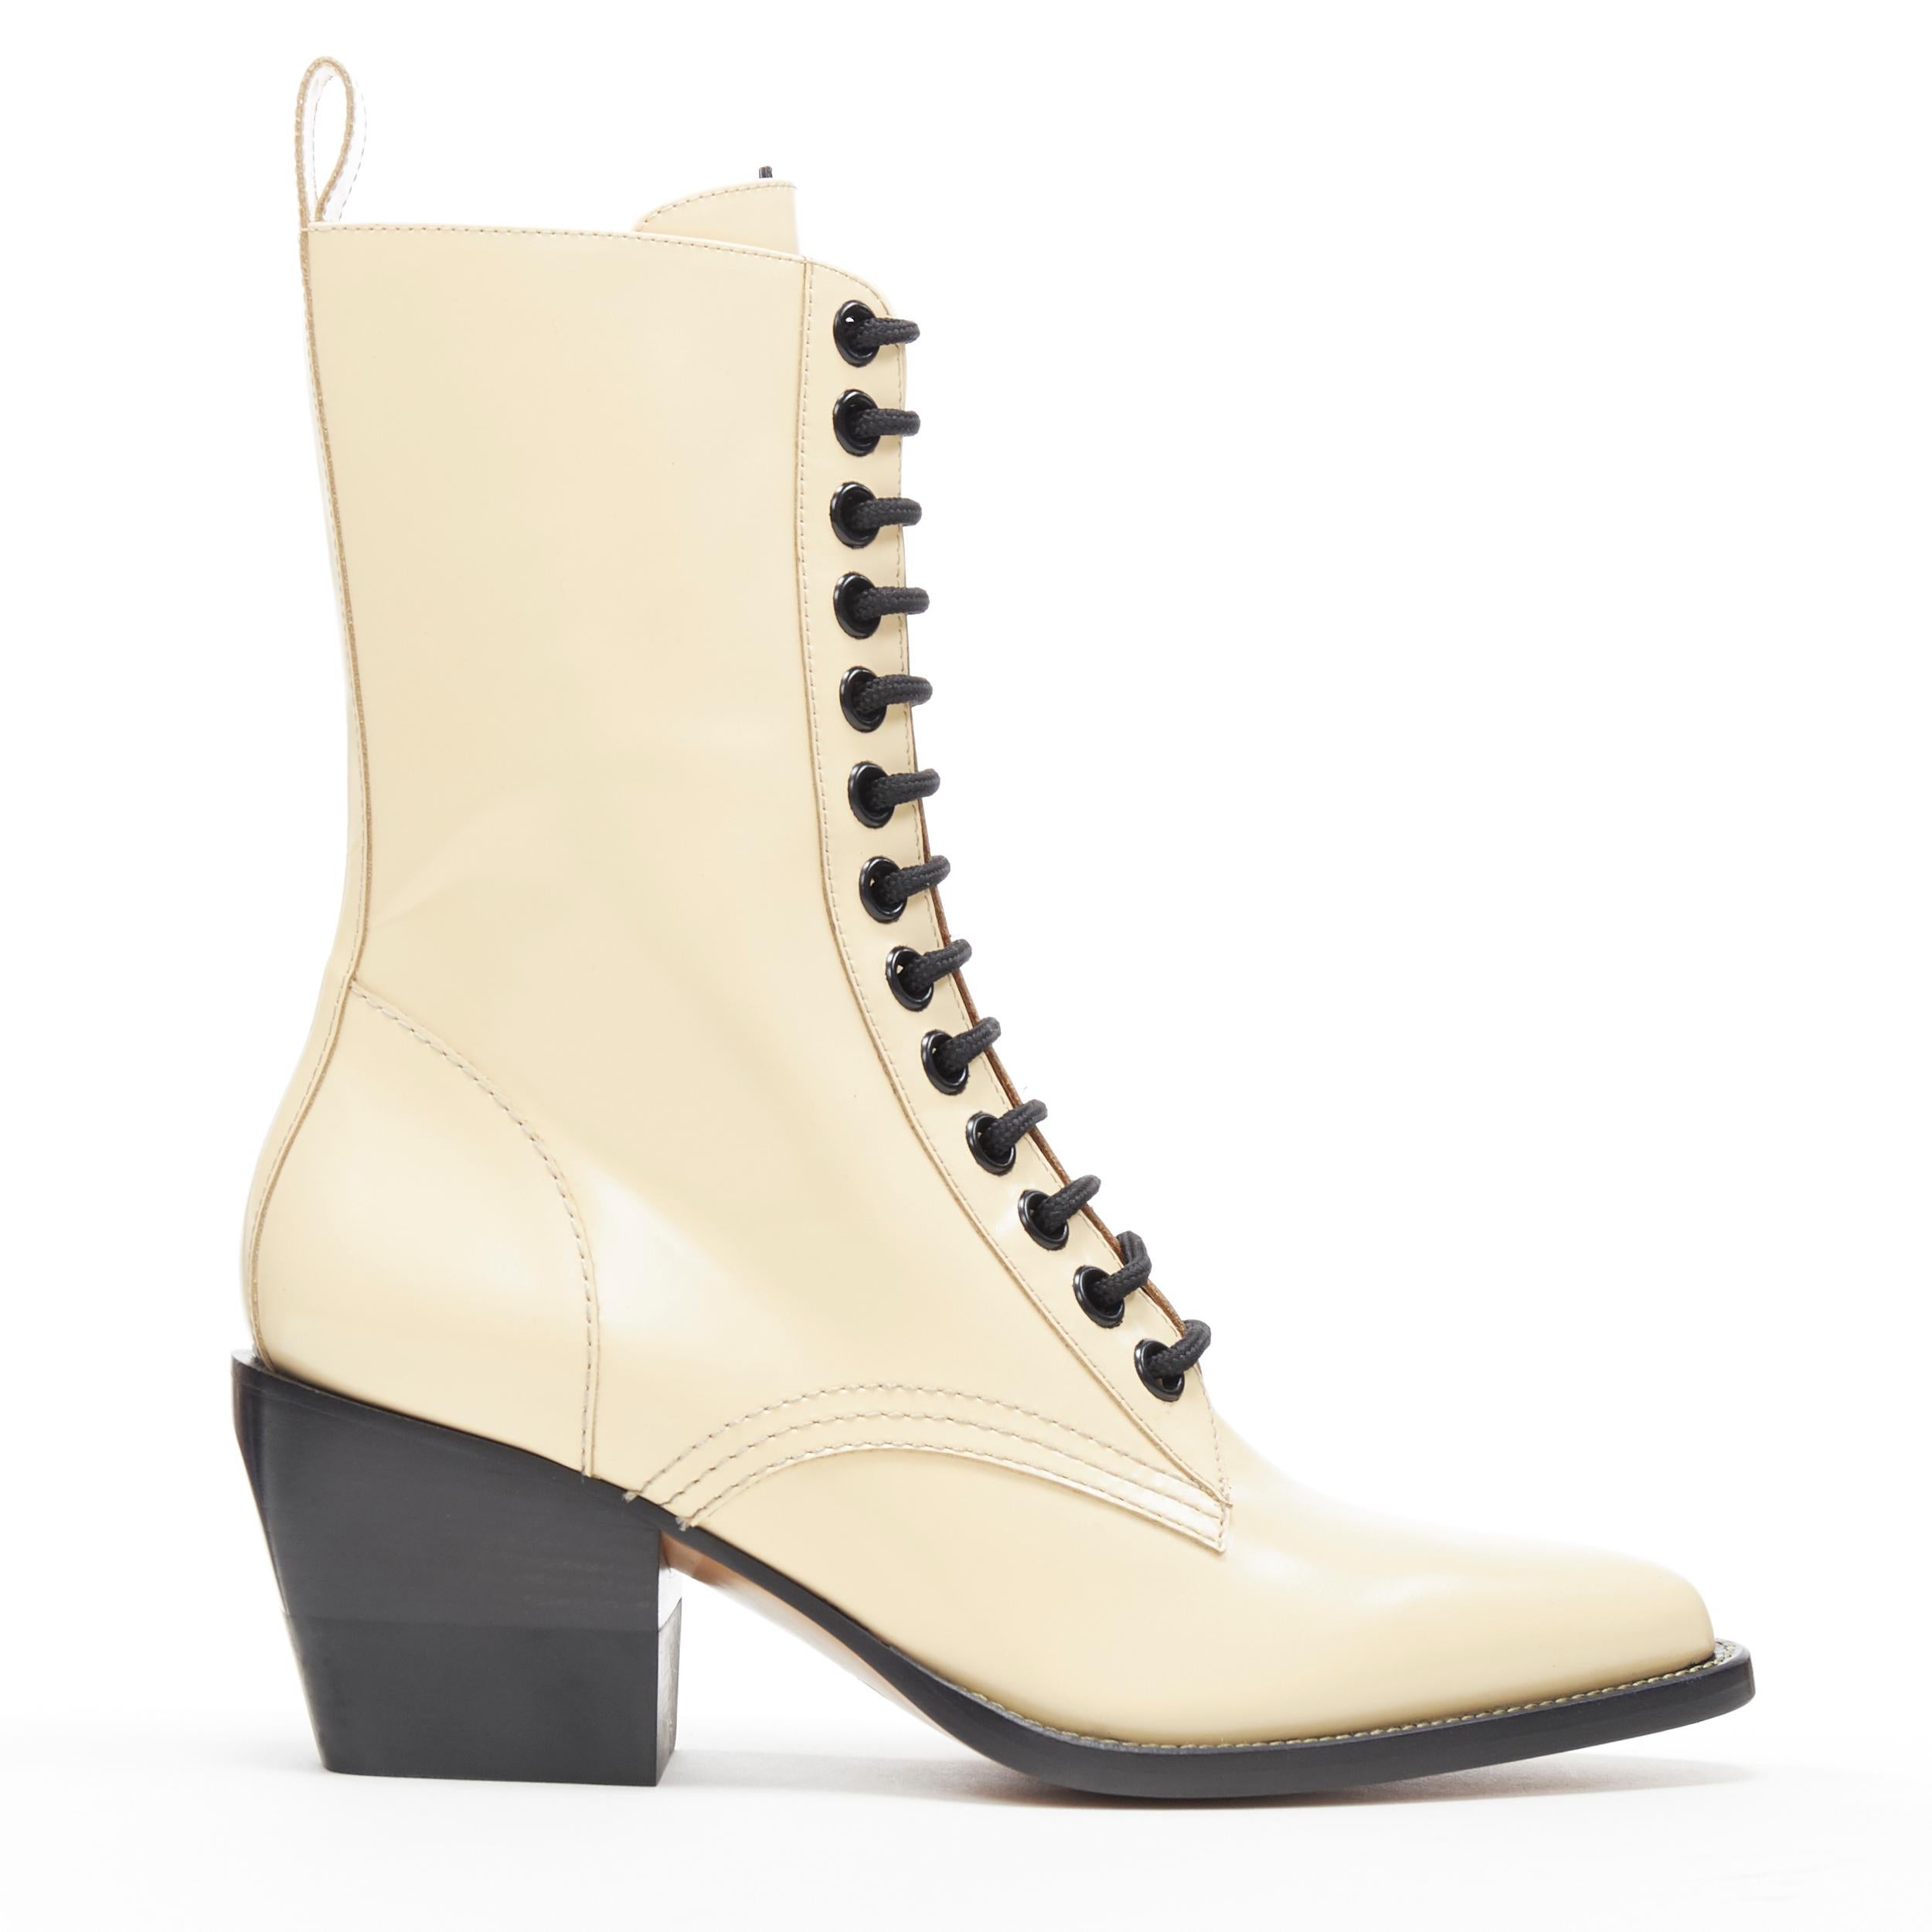 new CHLOE Runway Rylee cream leather lace up block heel pointed toe boot EU39.5
Brand: Chloe
Model Name / Style: Rylee
Material: Leather
Color: Beige
Pattern: Solid
Closure: Lace up
Extra Detail: Signature Runway Rylee boots by Chloe. Ankle boots.